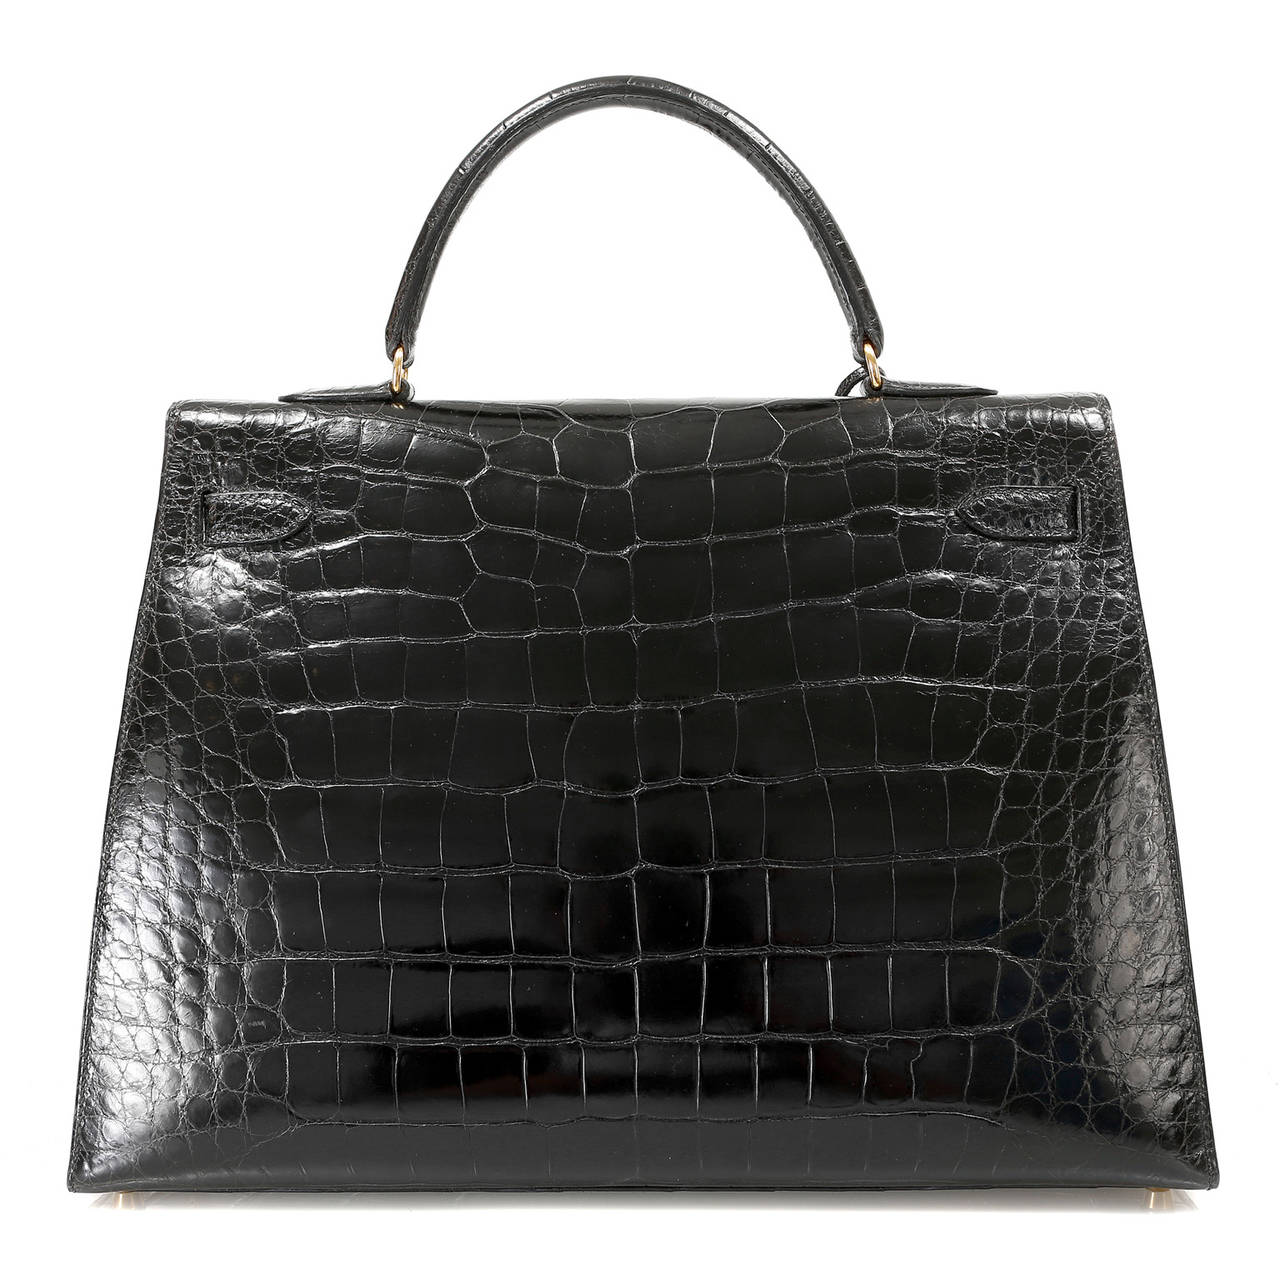 Hermès 35 cm Black Alligator Kelly 
Nearly pristine condition; rarely carried.   Hermès bags are considered the ultimate luxury item worldwide.  Each piece is handcrafted with waitlists that can exceed a year or more.  Extremely rare in Black